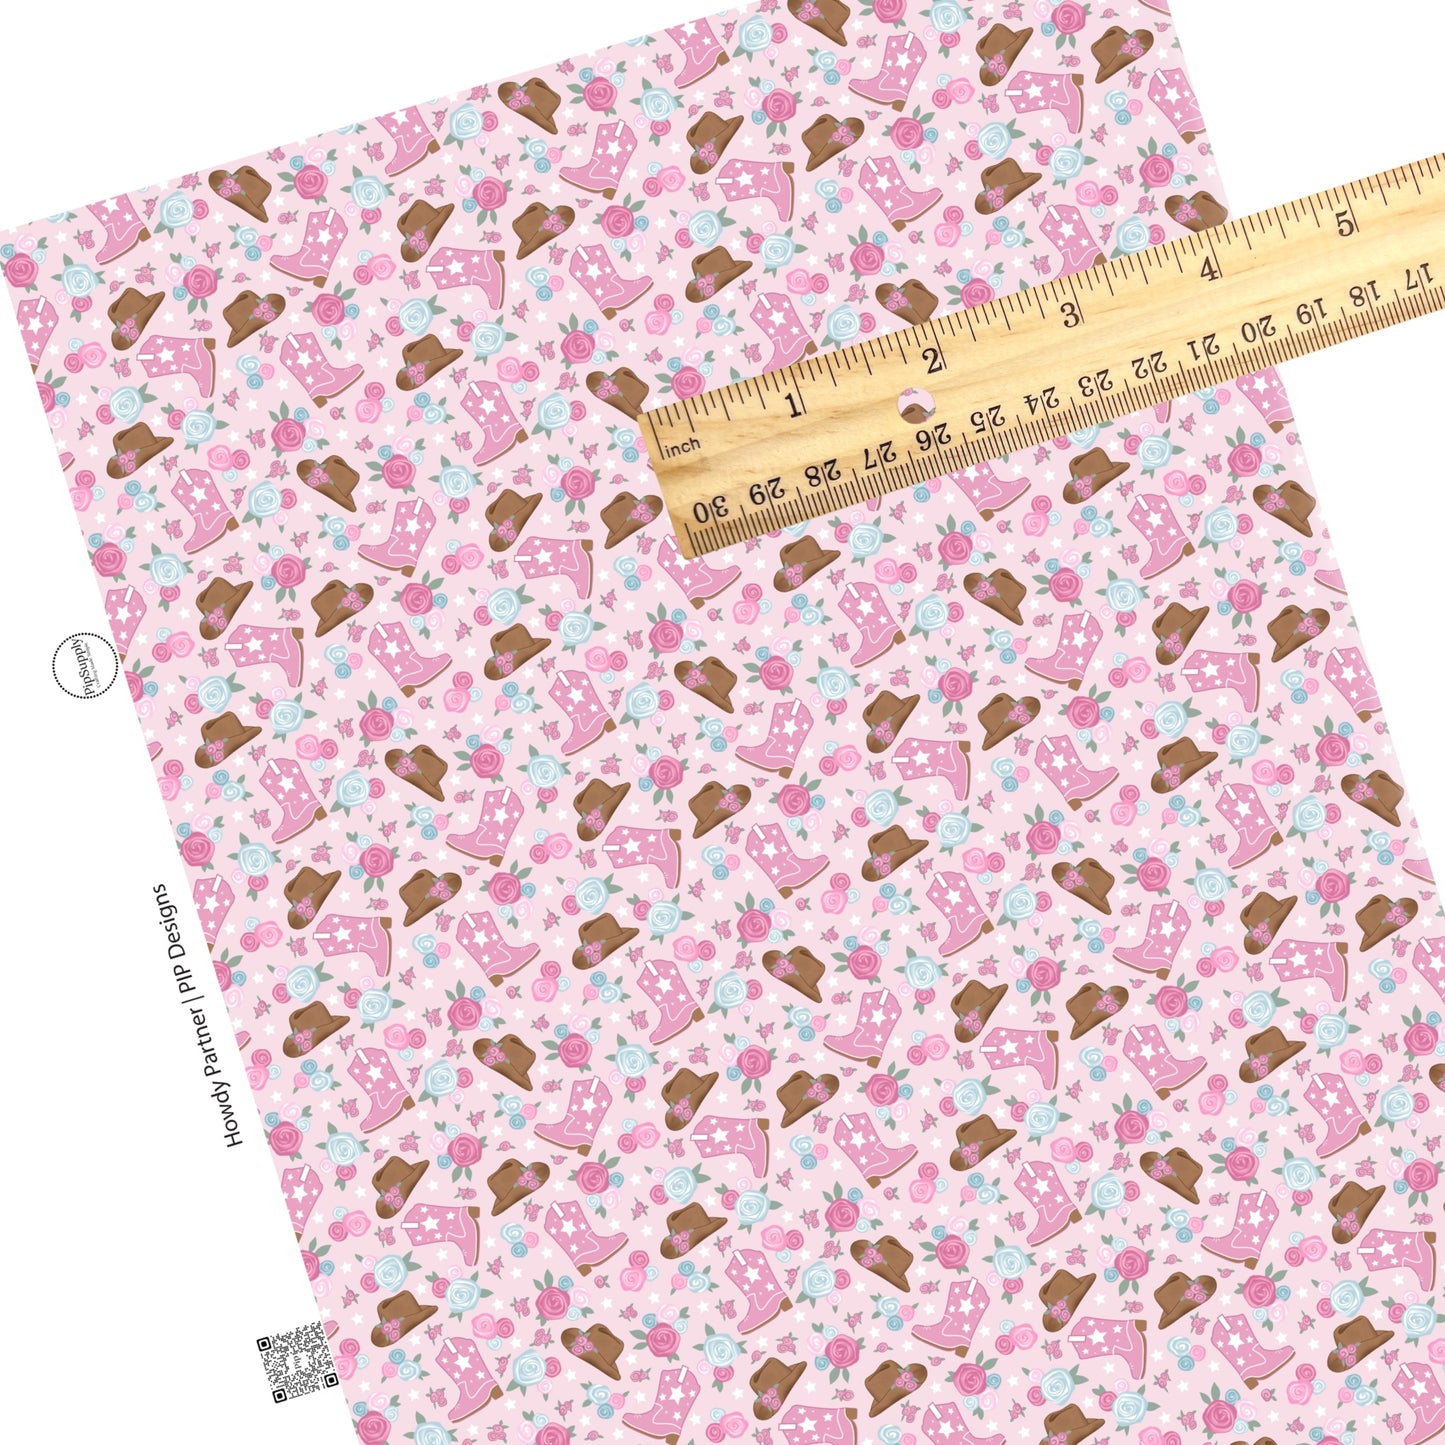 These western pink floral pattern themed faux leather sheets contain the following design elements: cowgirl boots and hats surrounded by pink and light blue flowers. Our CPSIA compliant faux leather sheets or rolls can be used for all types of crafting projects.